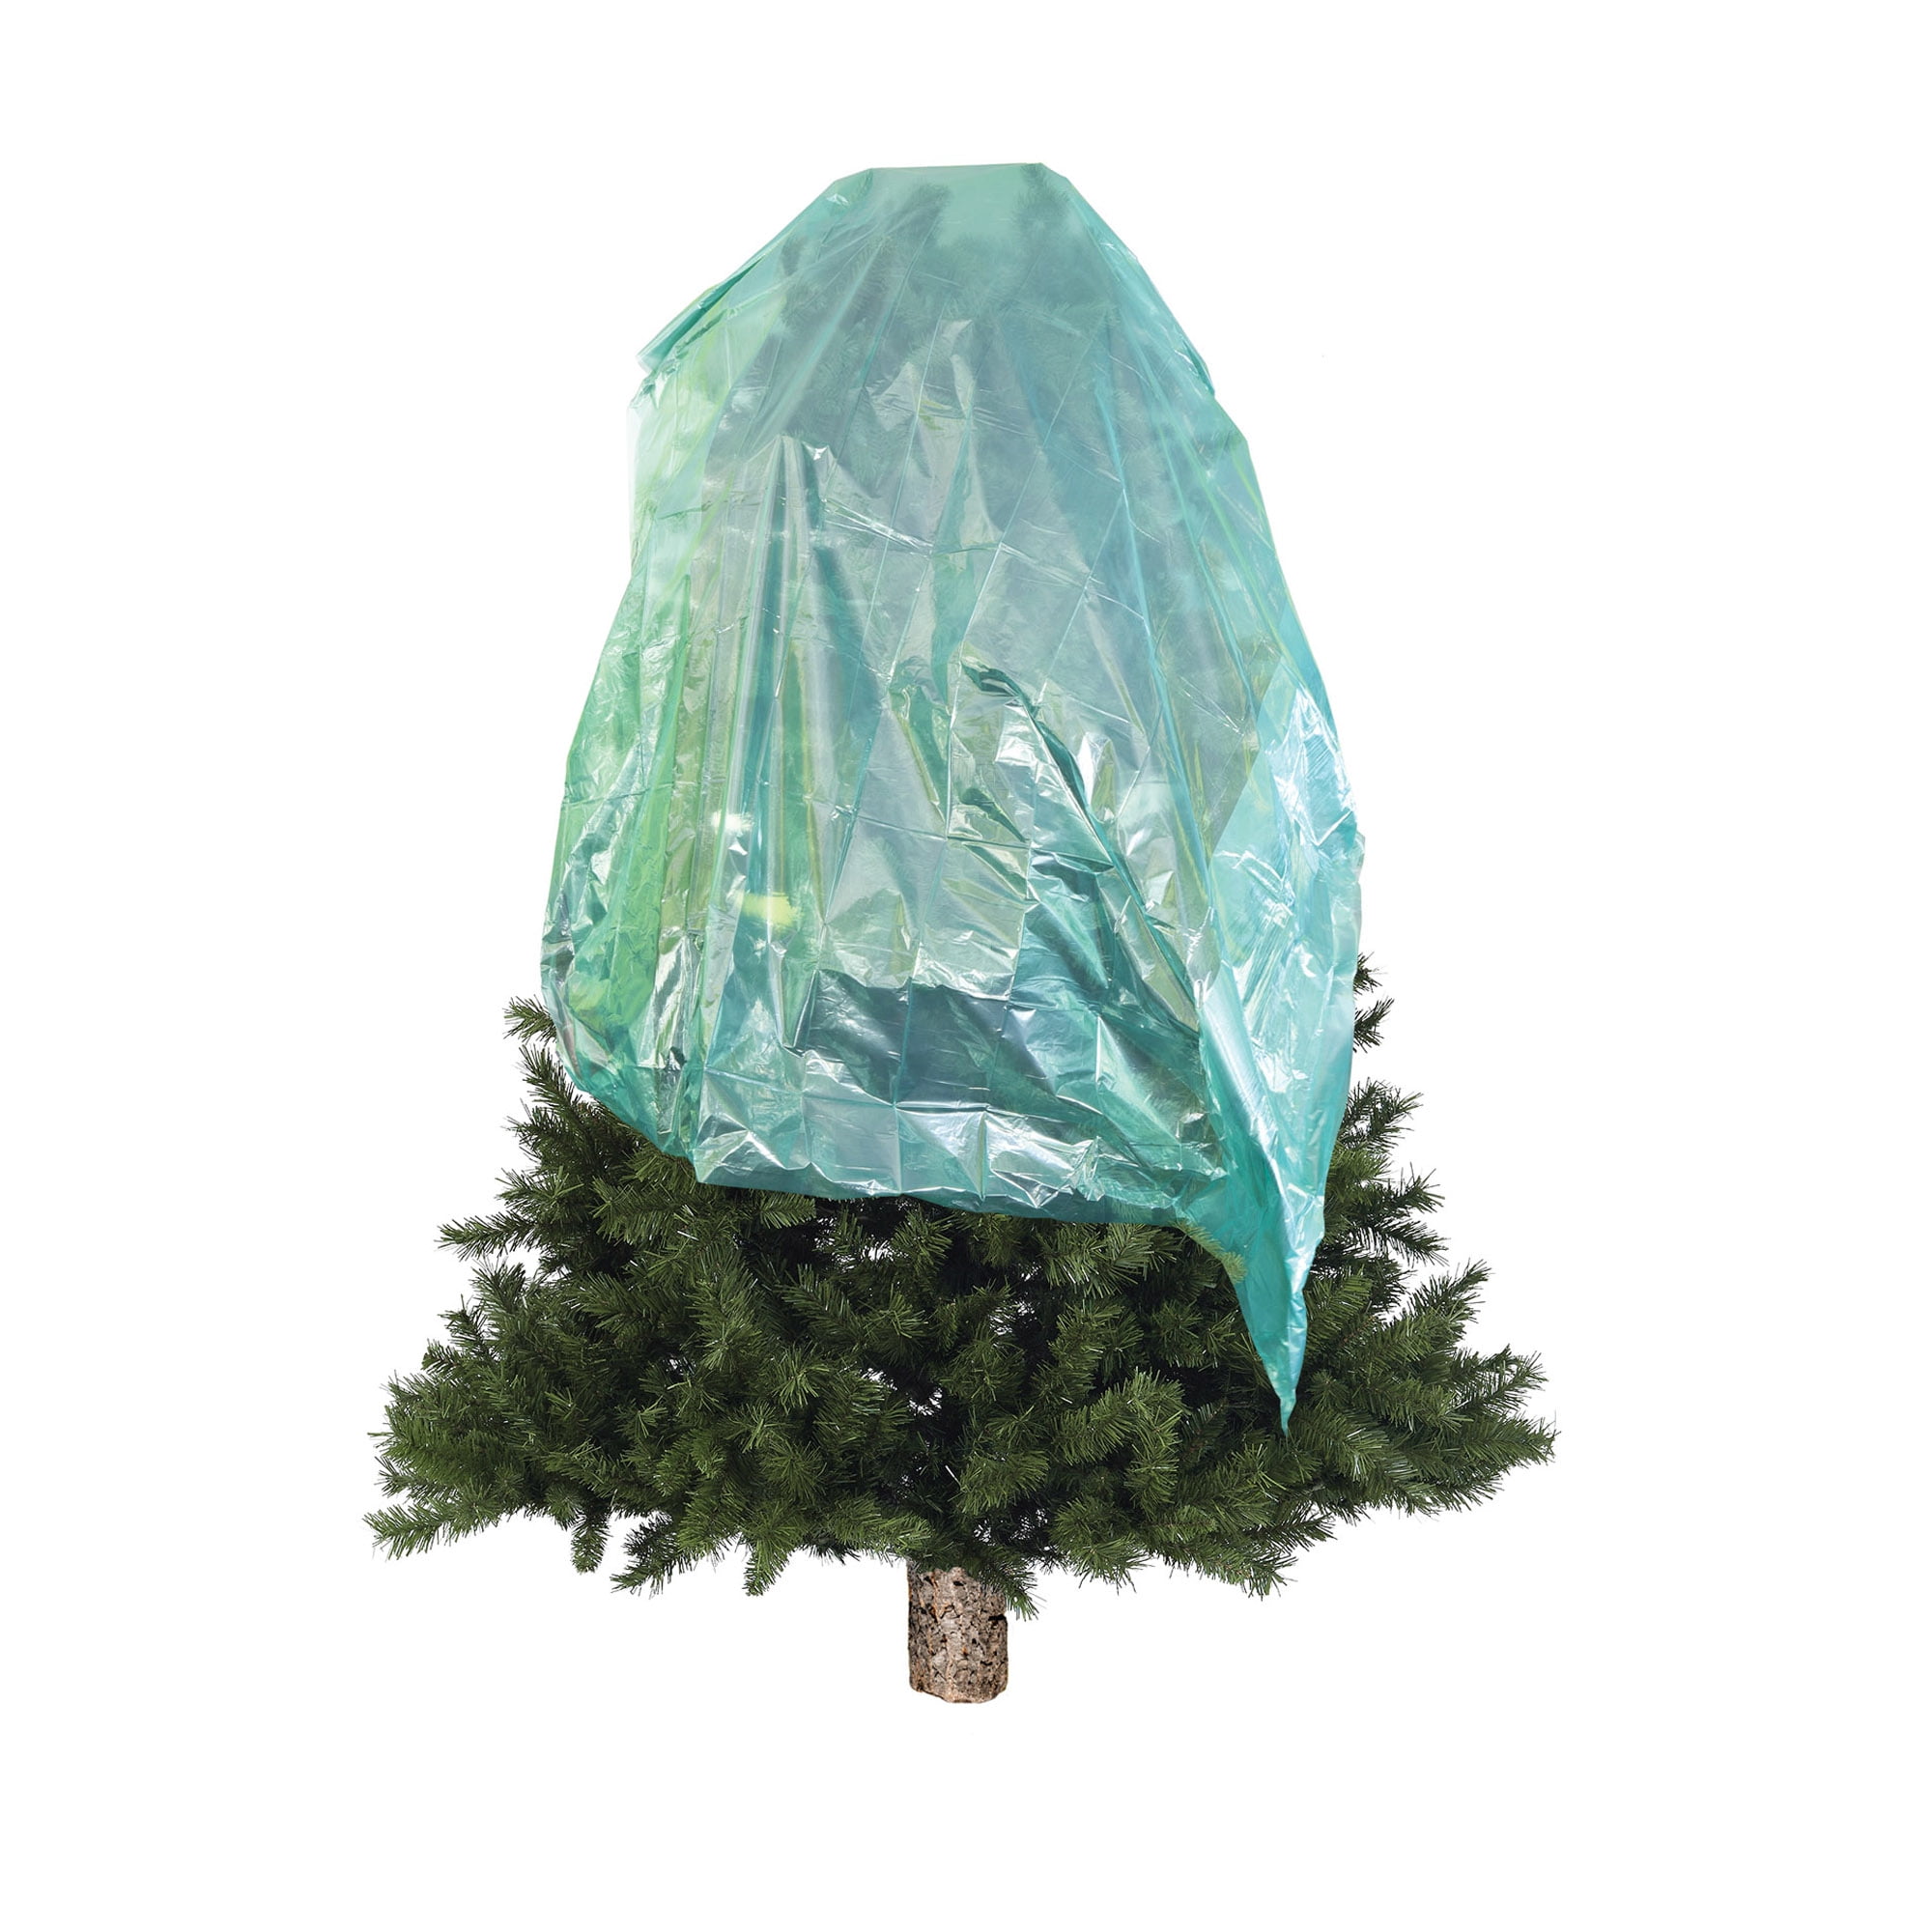 Pursell Manufacturing Christmas Tree Disposal and Storage Bag - Fits Trees to 9-Feet 5-Inches (Standard Version)